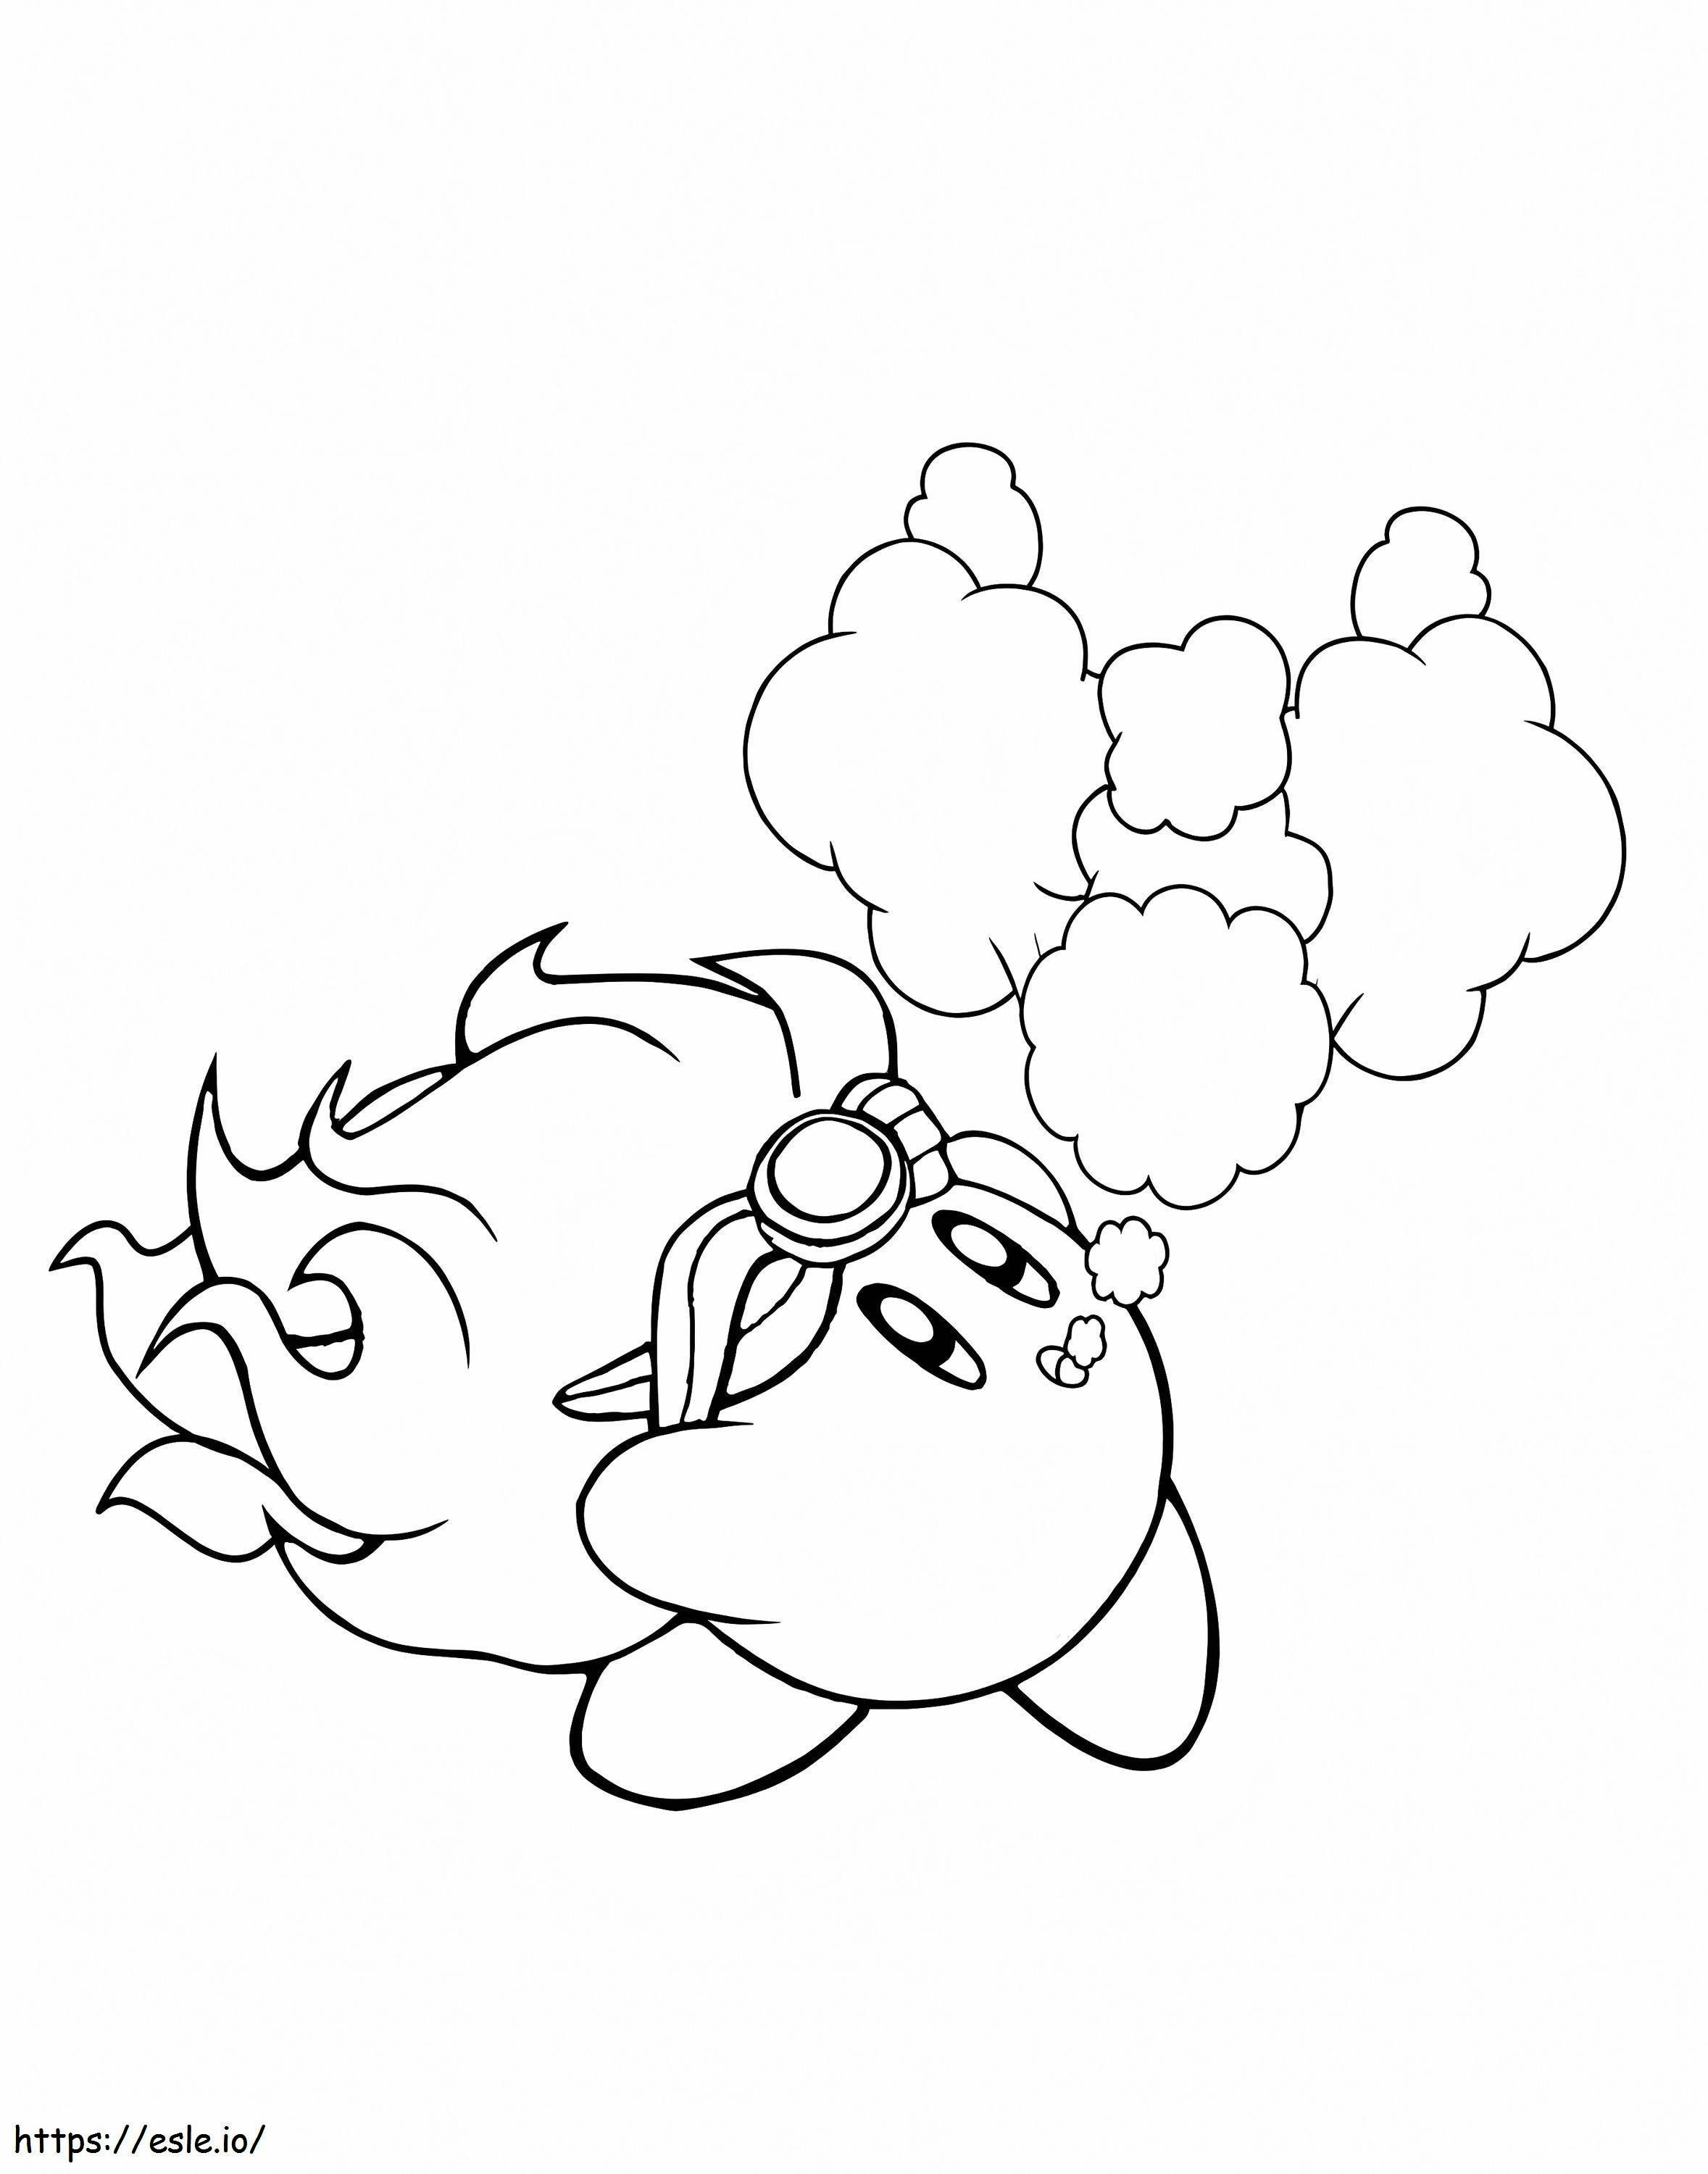 Print Kirby coloring page